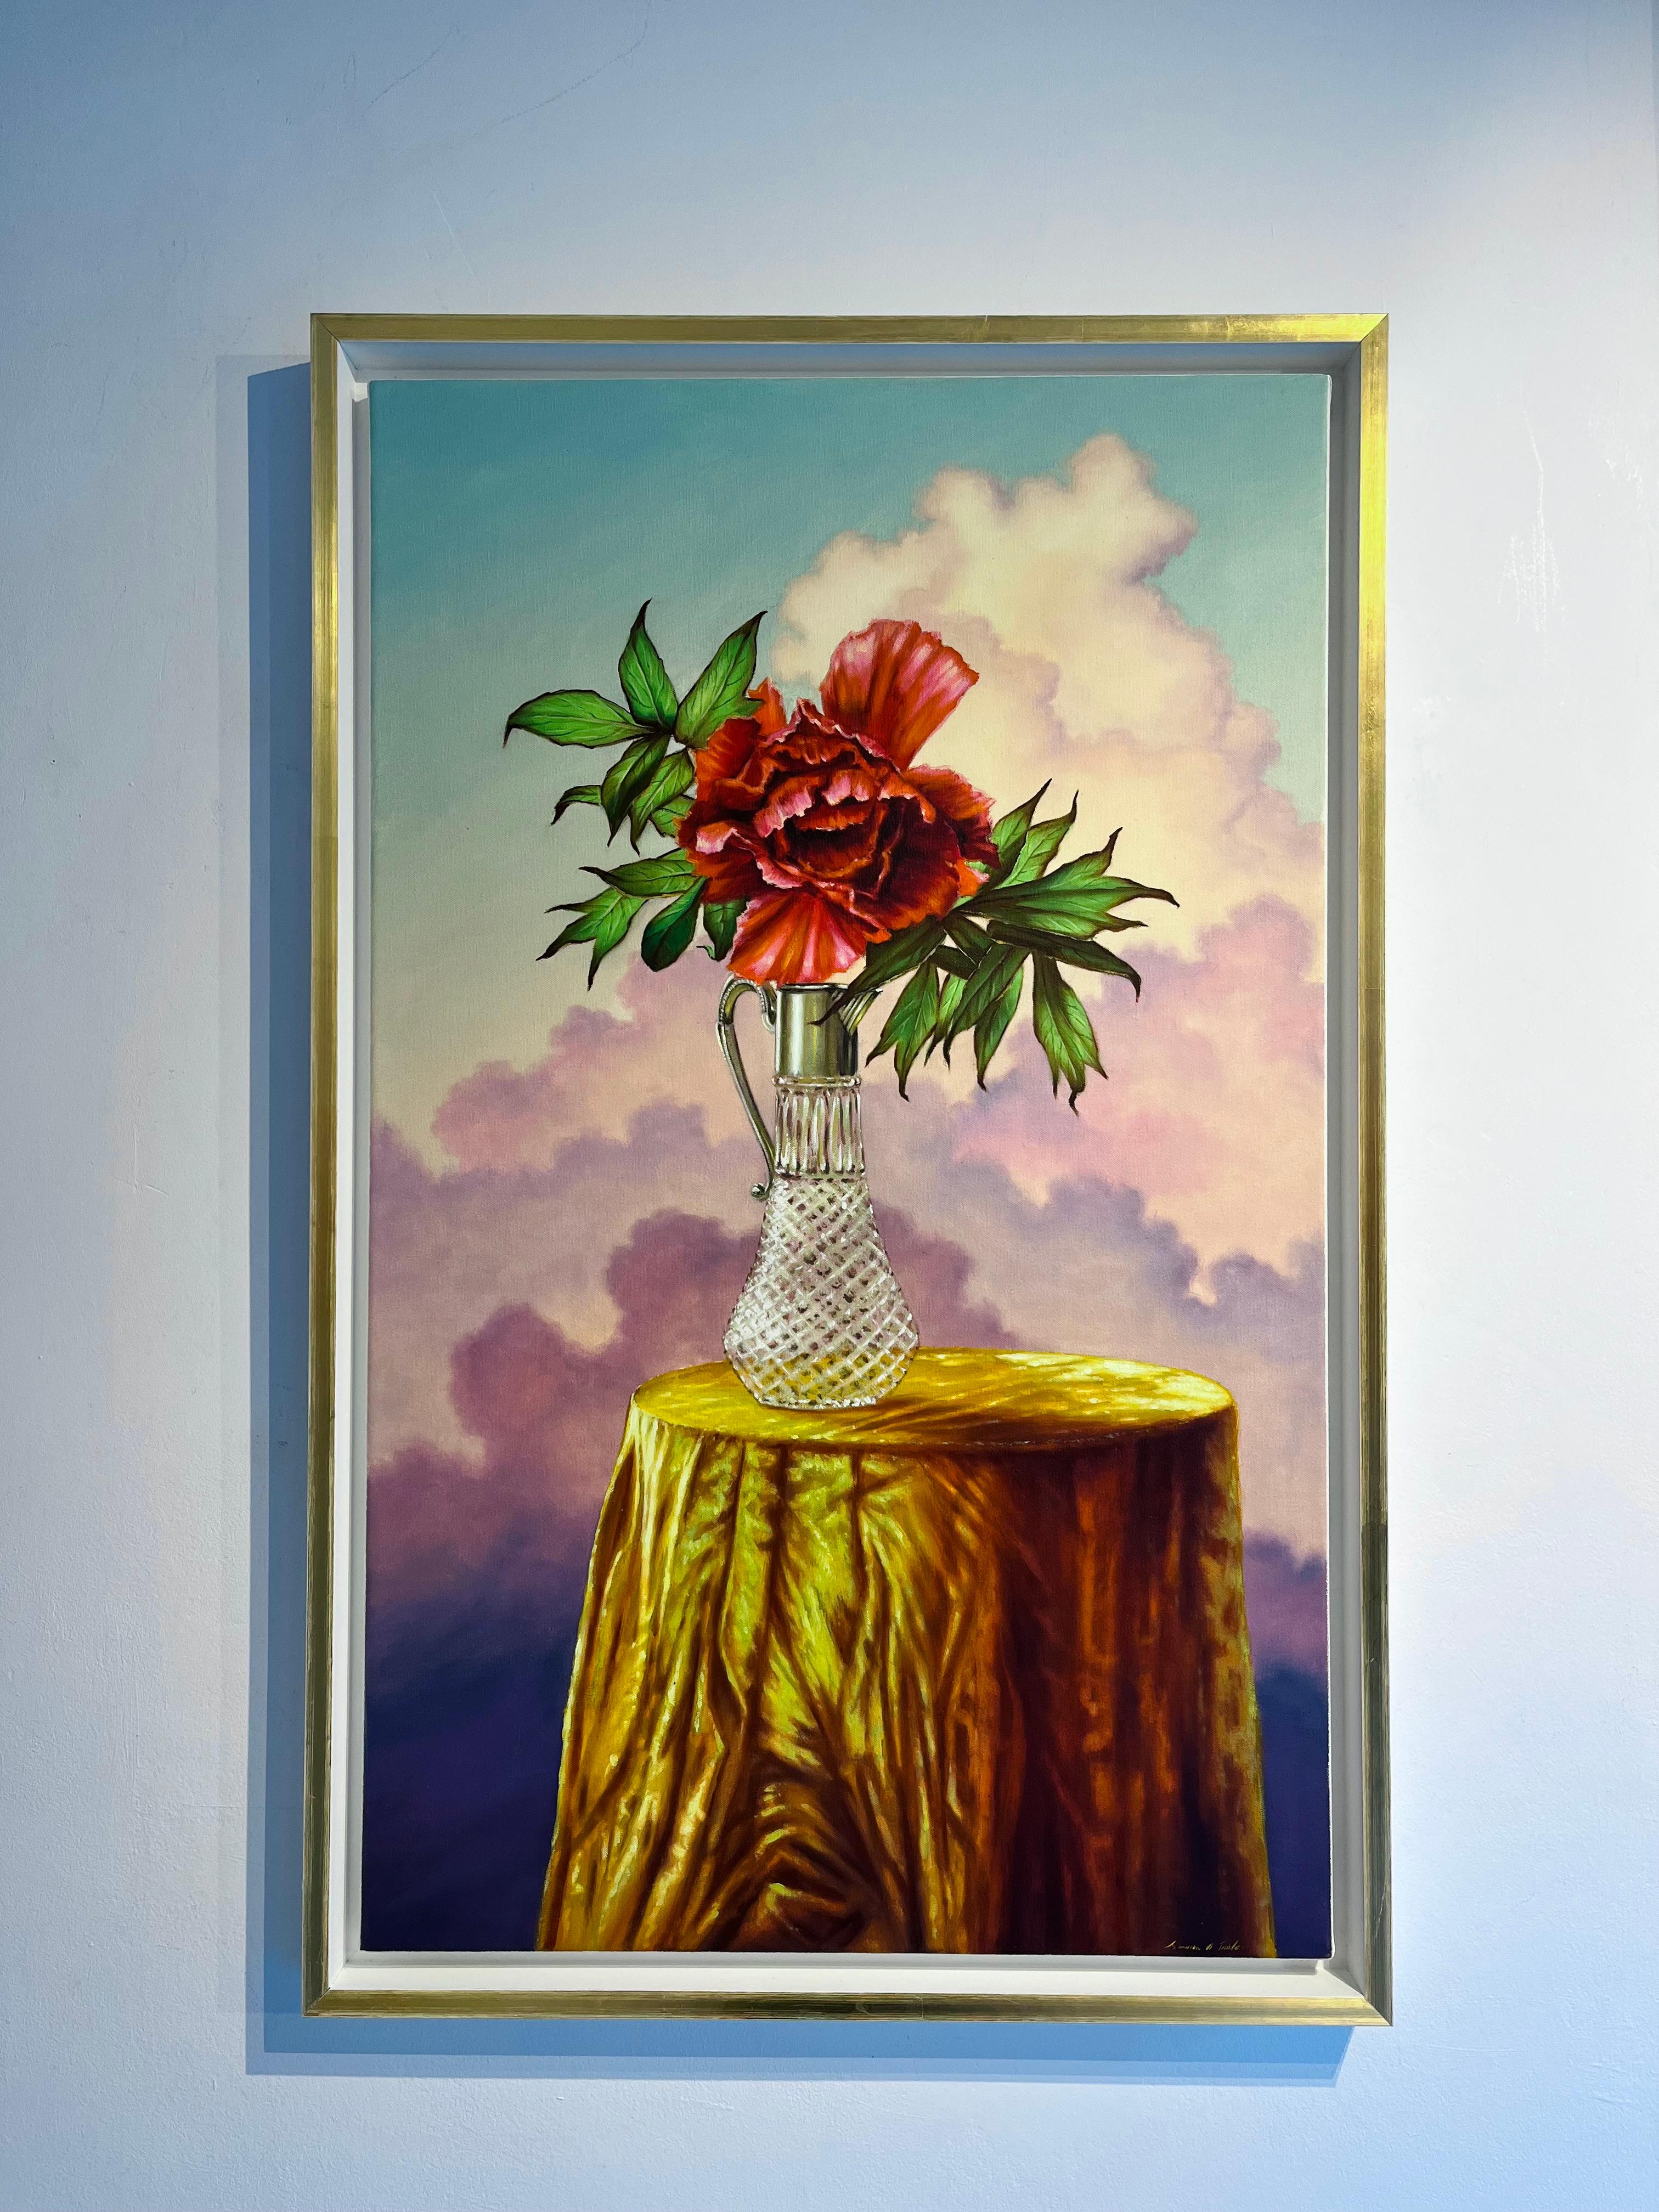 It's the Perfect Day, but It's Getting Late - realism surrealistic oil painting - Painting by Laurence O'Toole